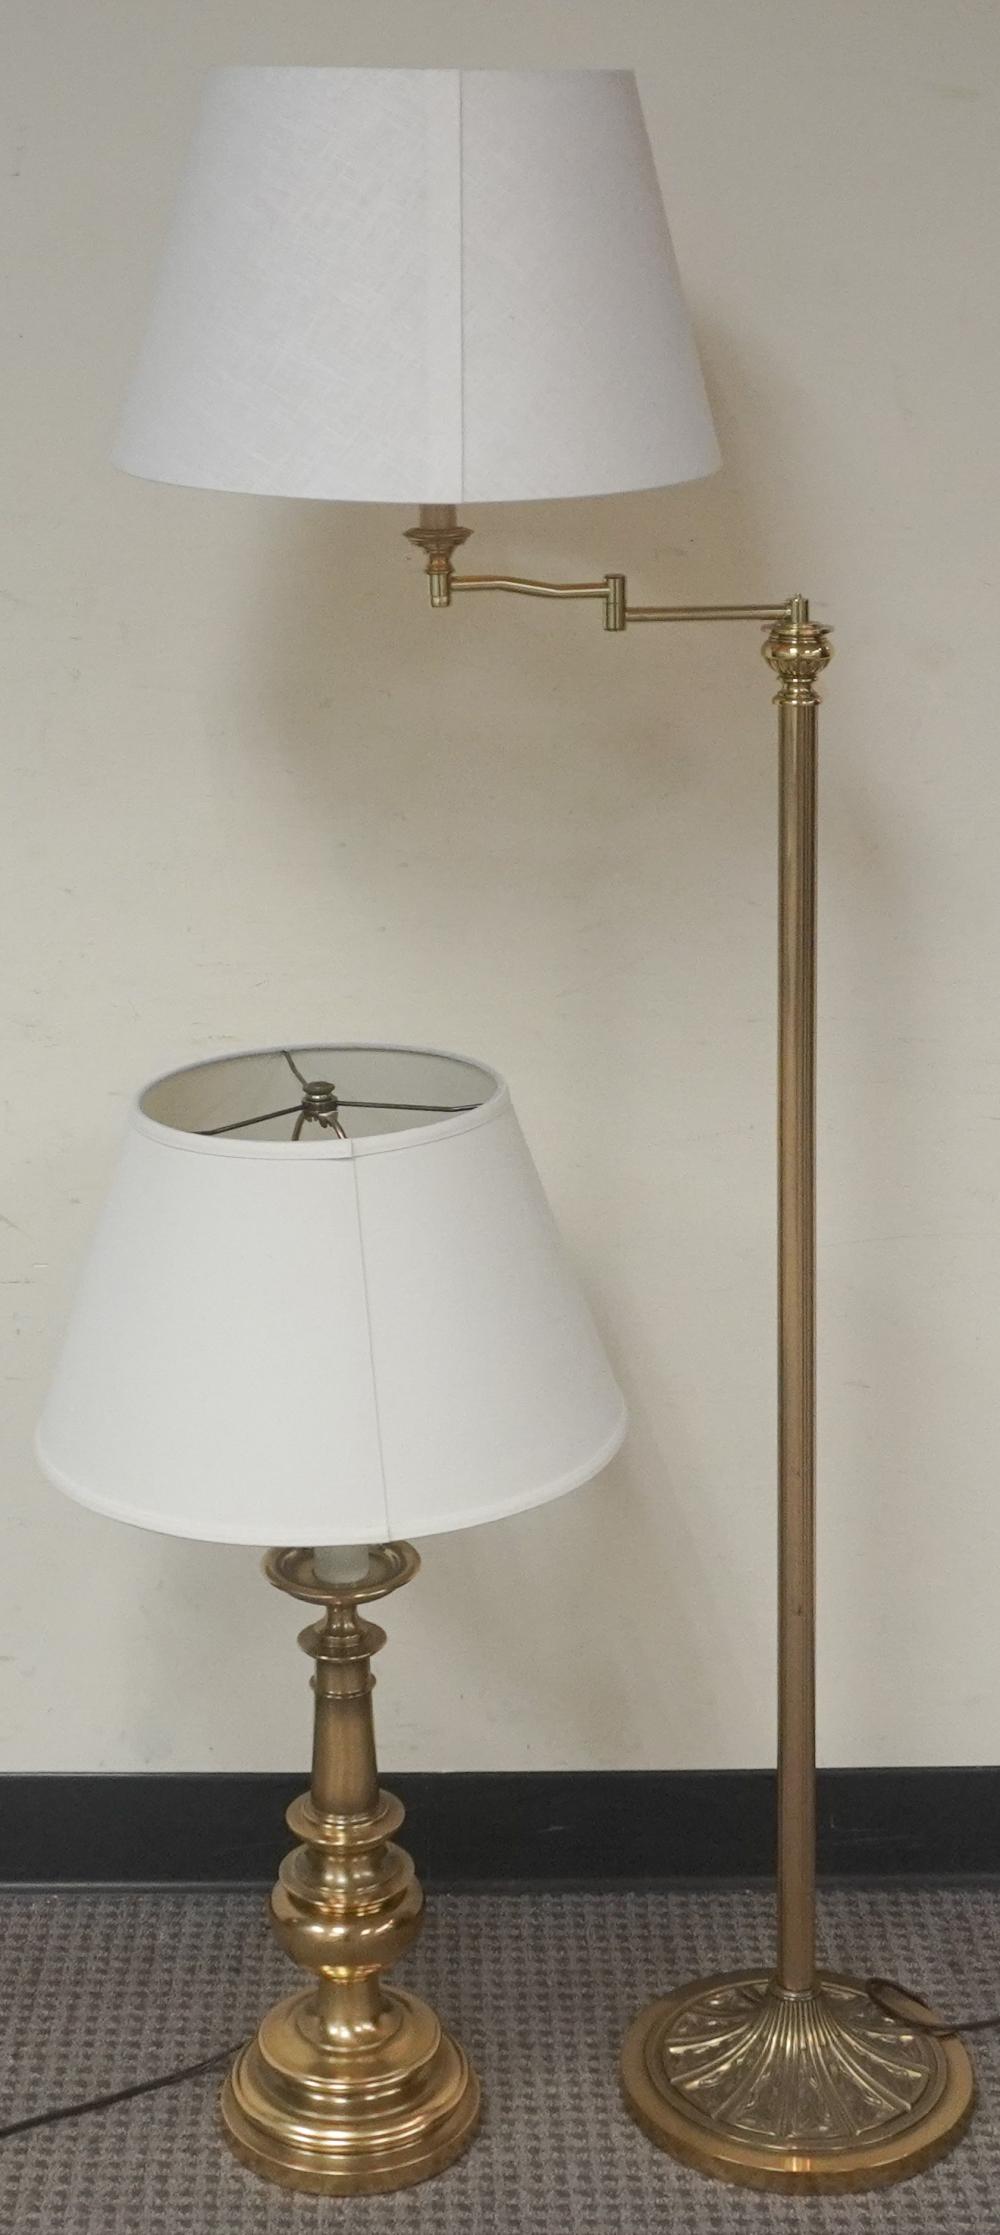 STIFFEL BRASS FLOOR LAMP AND TABLE 2e5741